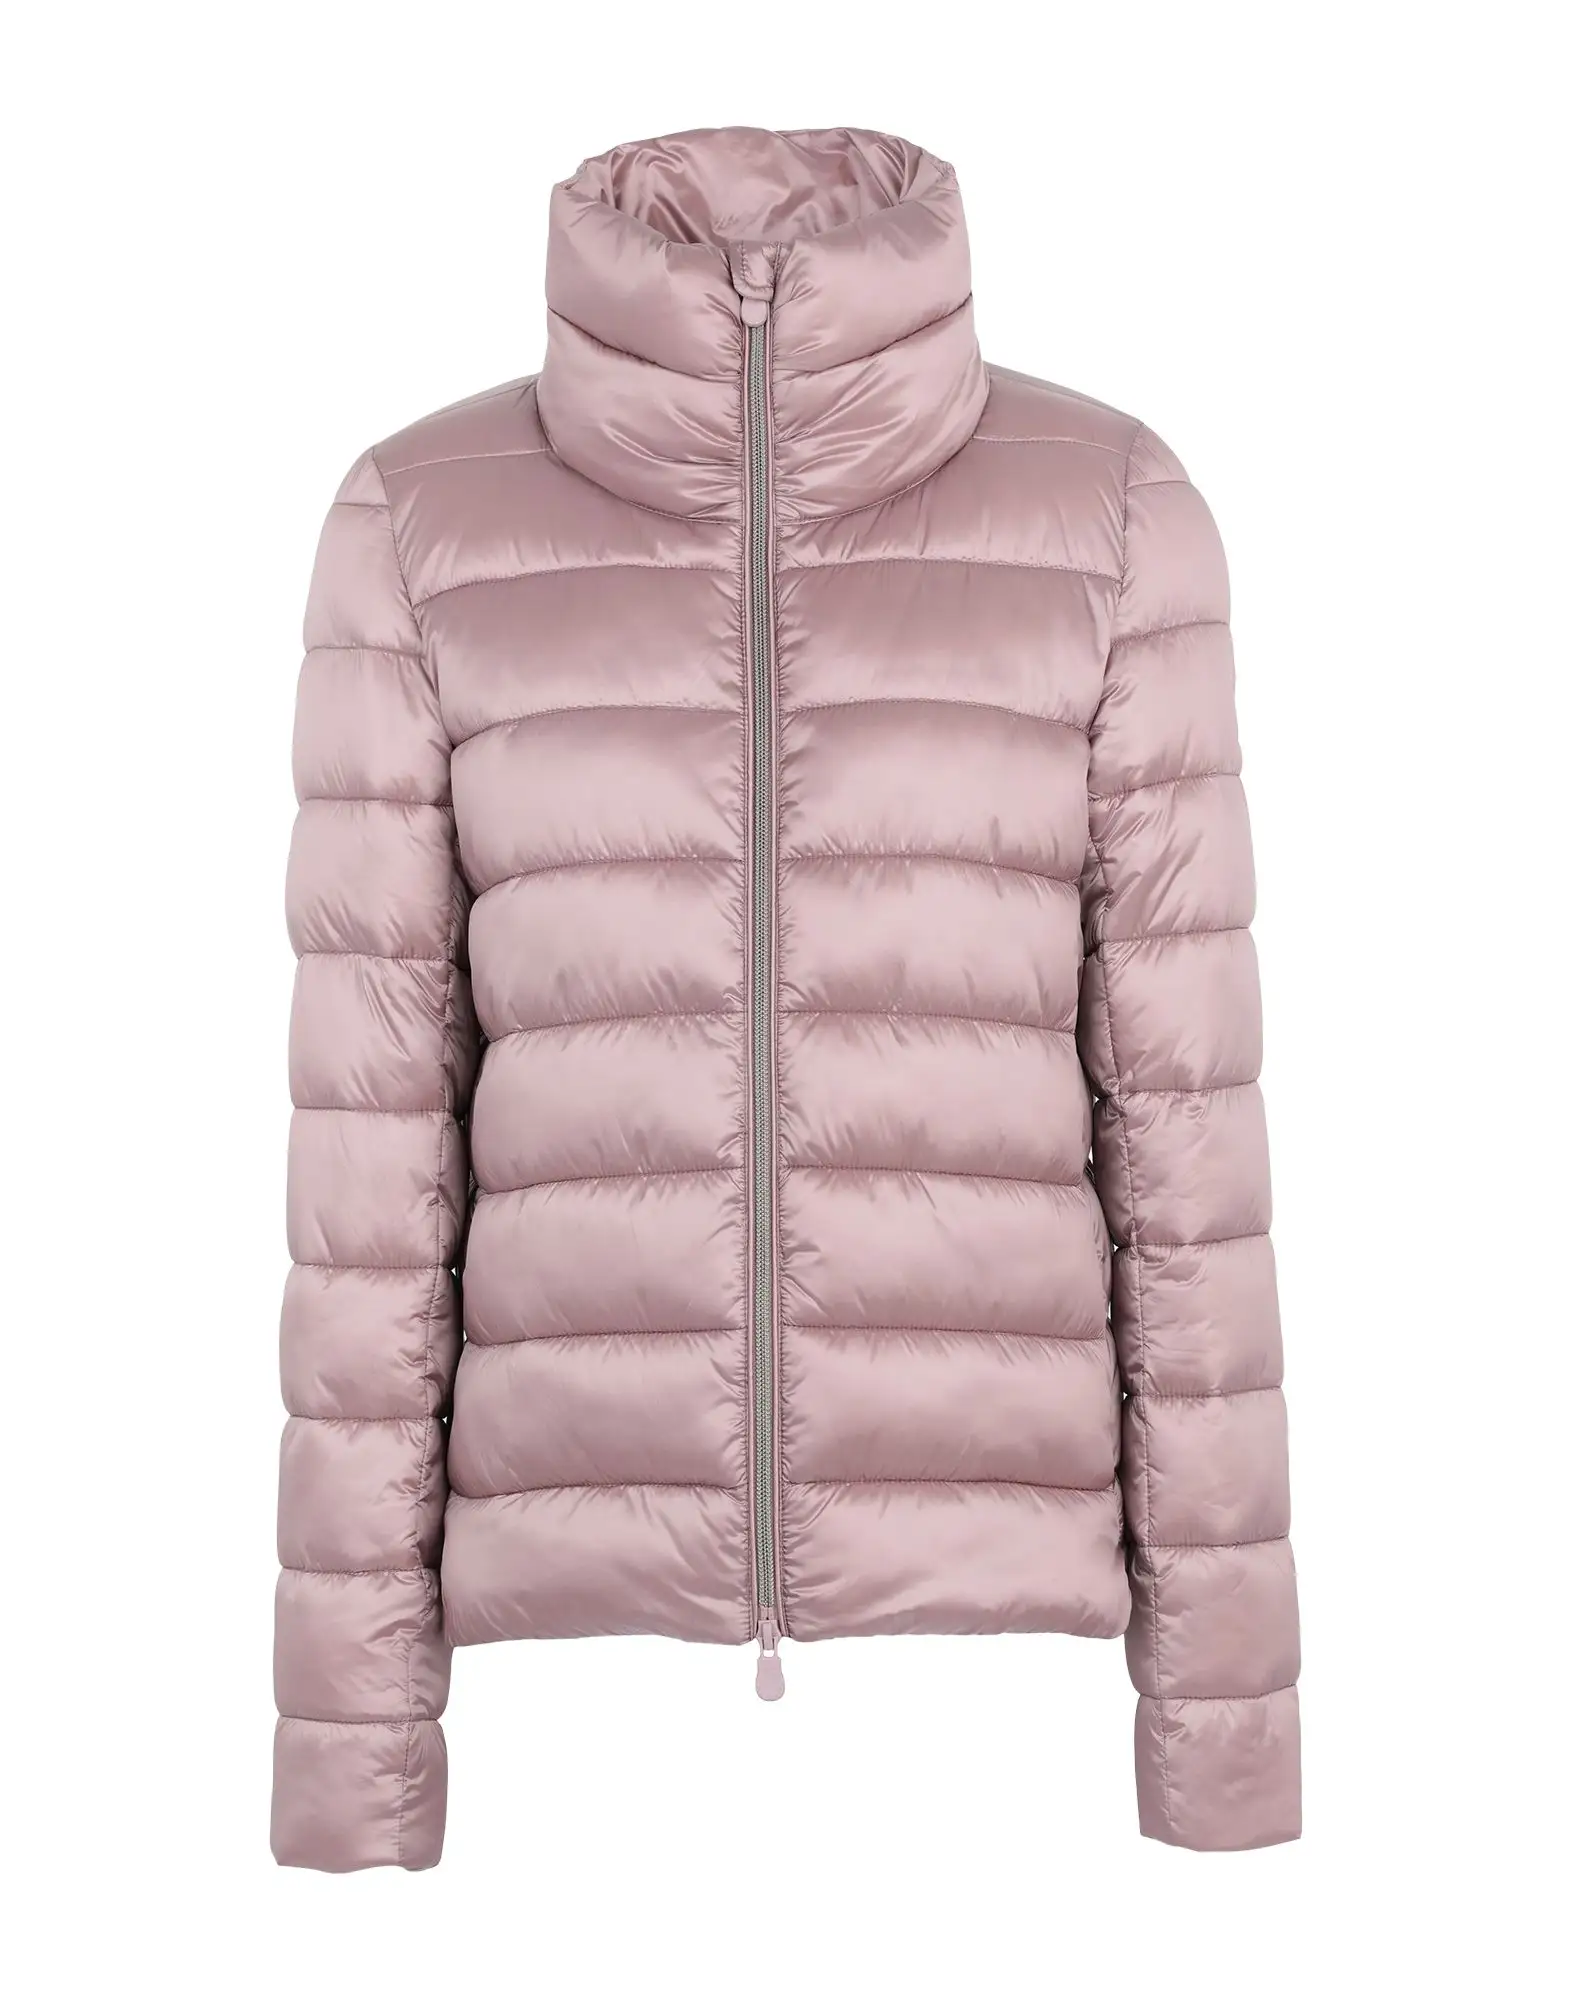 2022 Top quality winter casual design puffer down jacket women down jacket pink puffer jacket women